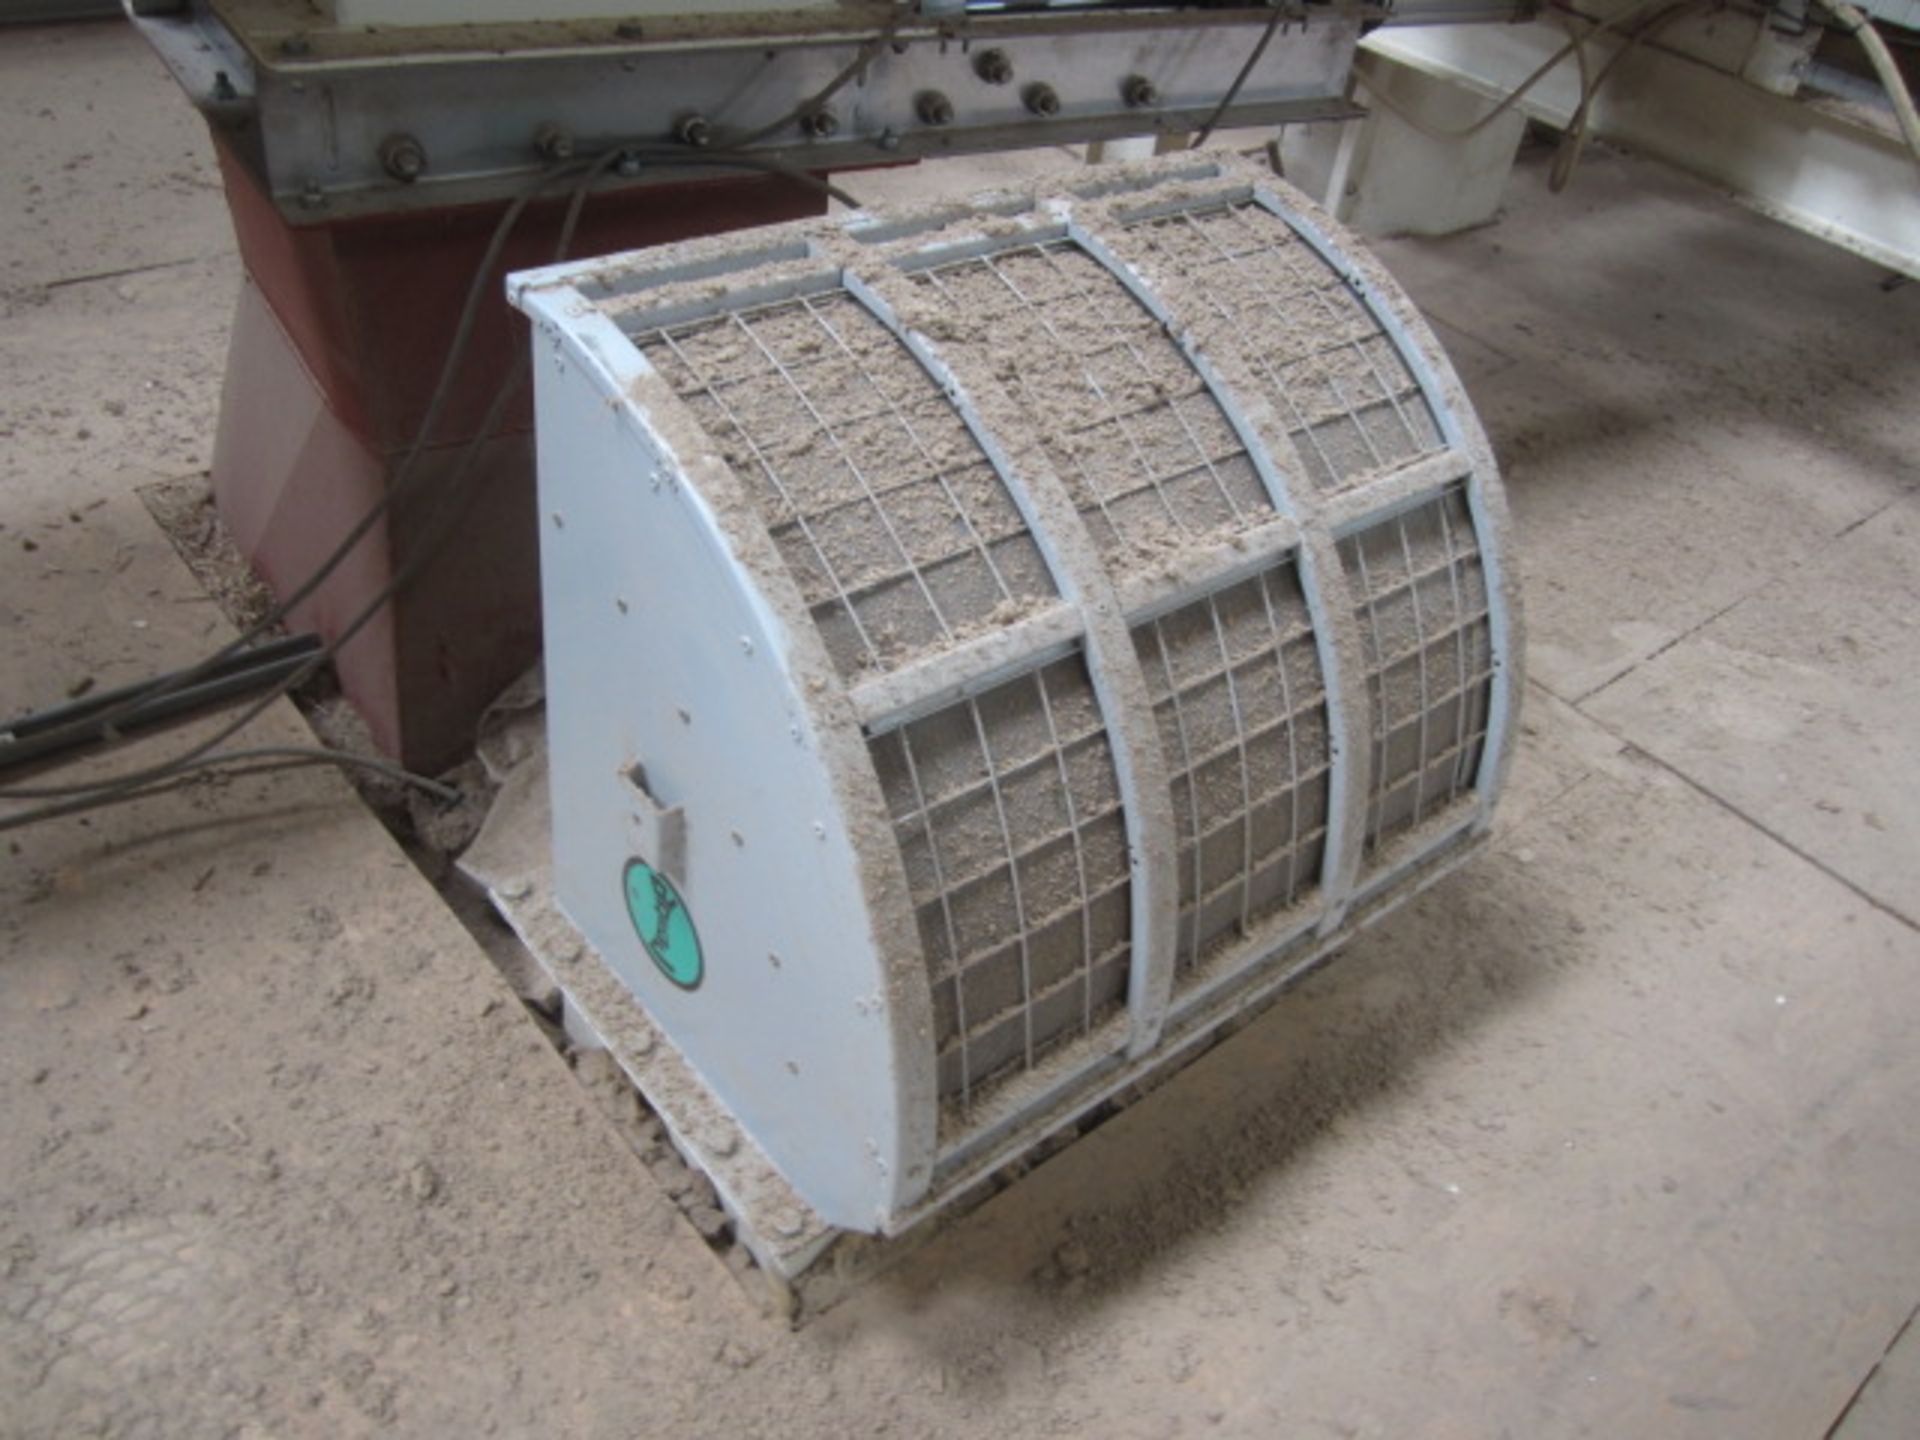 Rembe Q-Box-11 explosion vent, serial no: QB101002, size 305 x 610mm - located on mezzanine floor. - Image 2 of 3